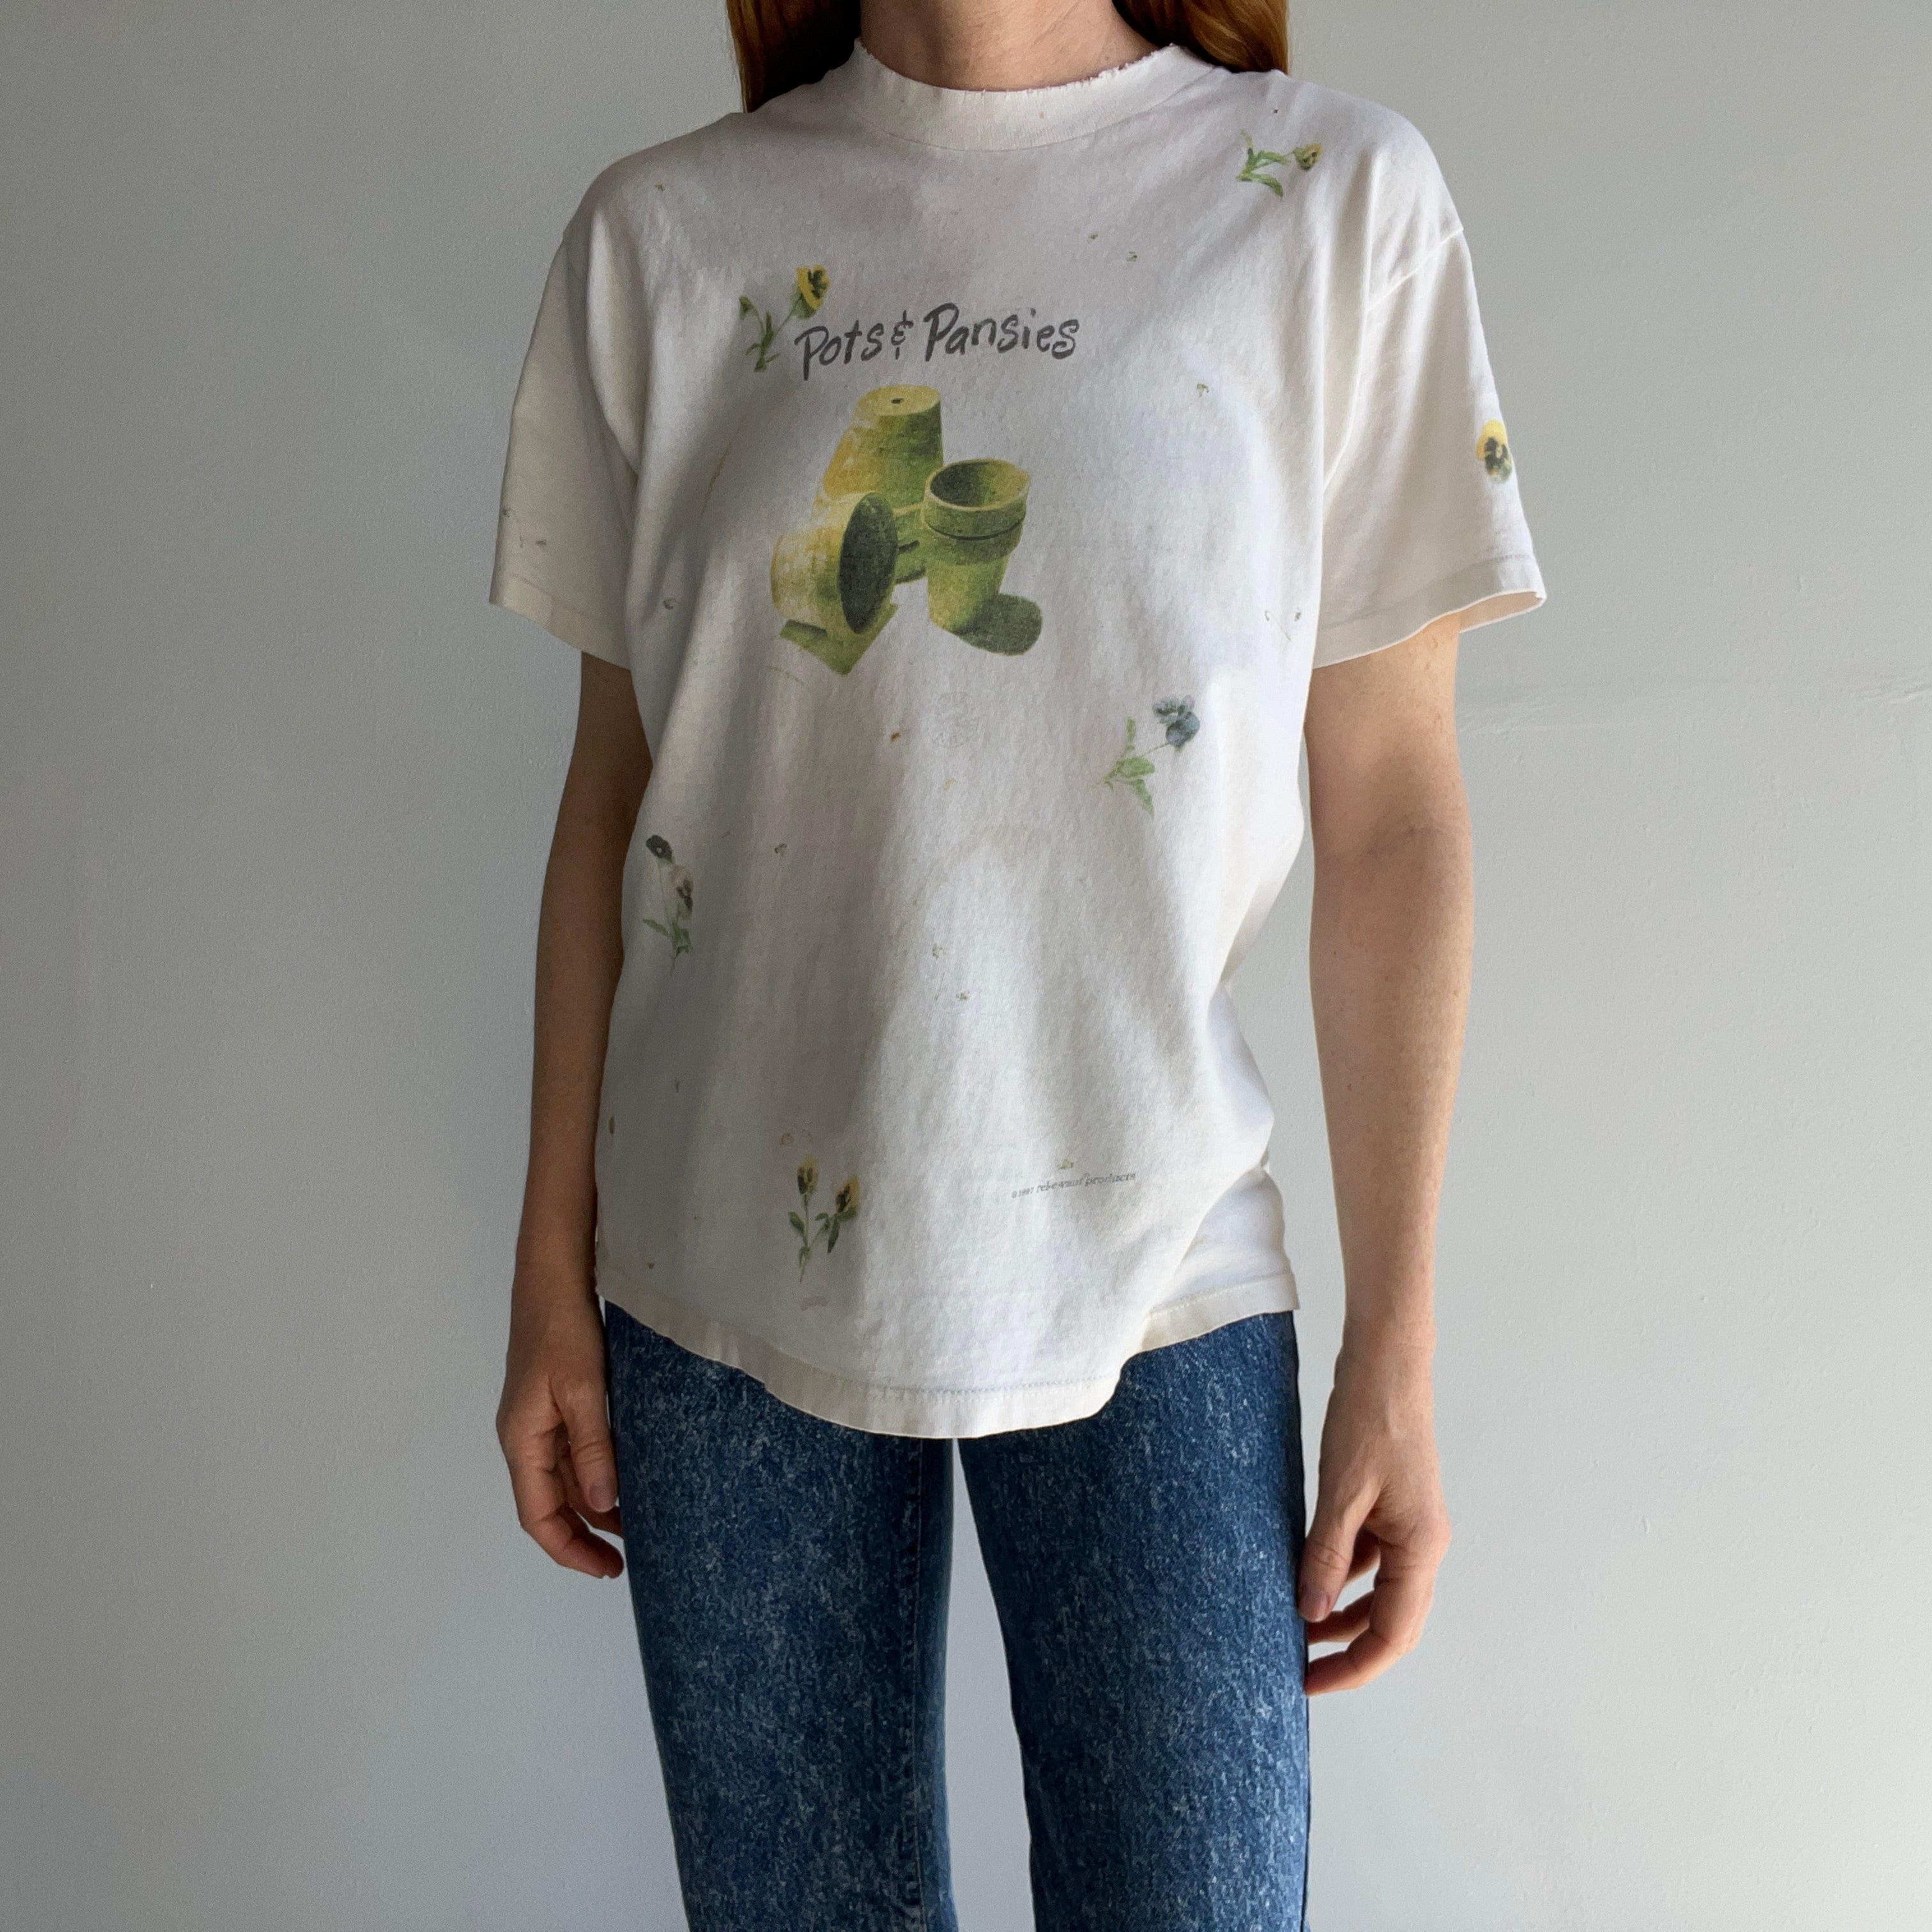 1990s Pots & Pansies Tattered, Torn, Worn, Split Collar and Stained Cotton T-Shirt